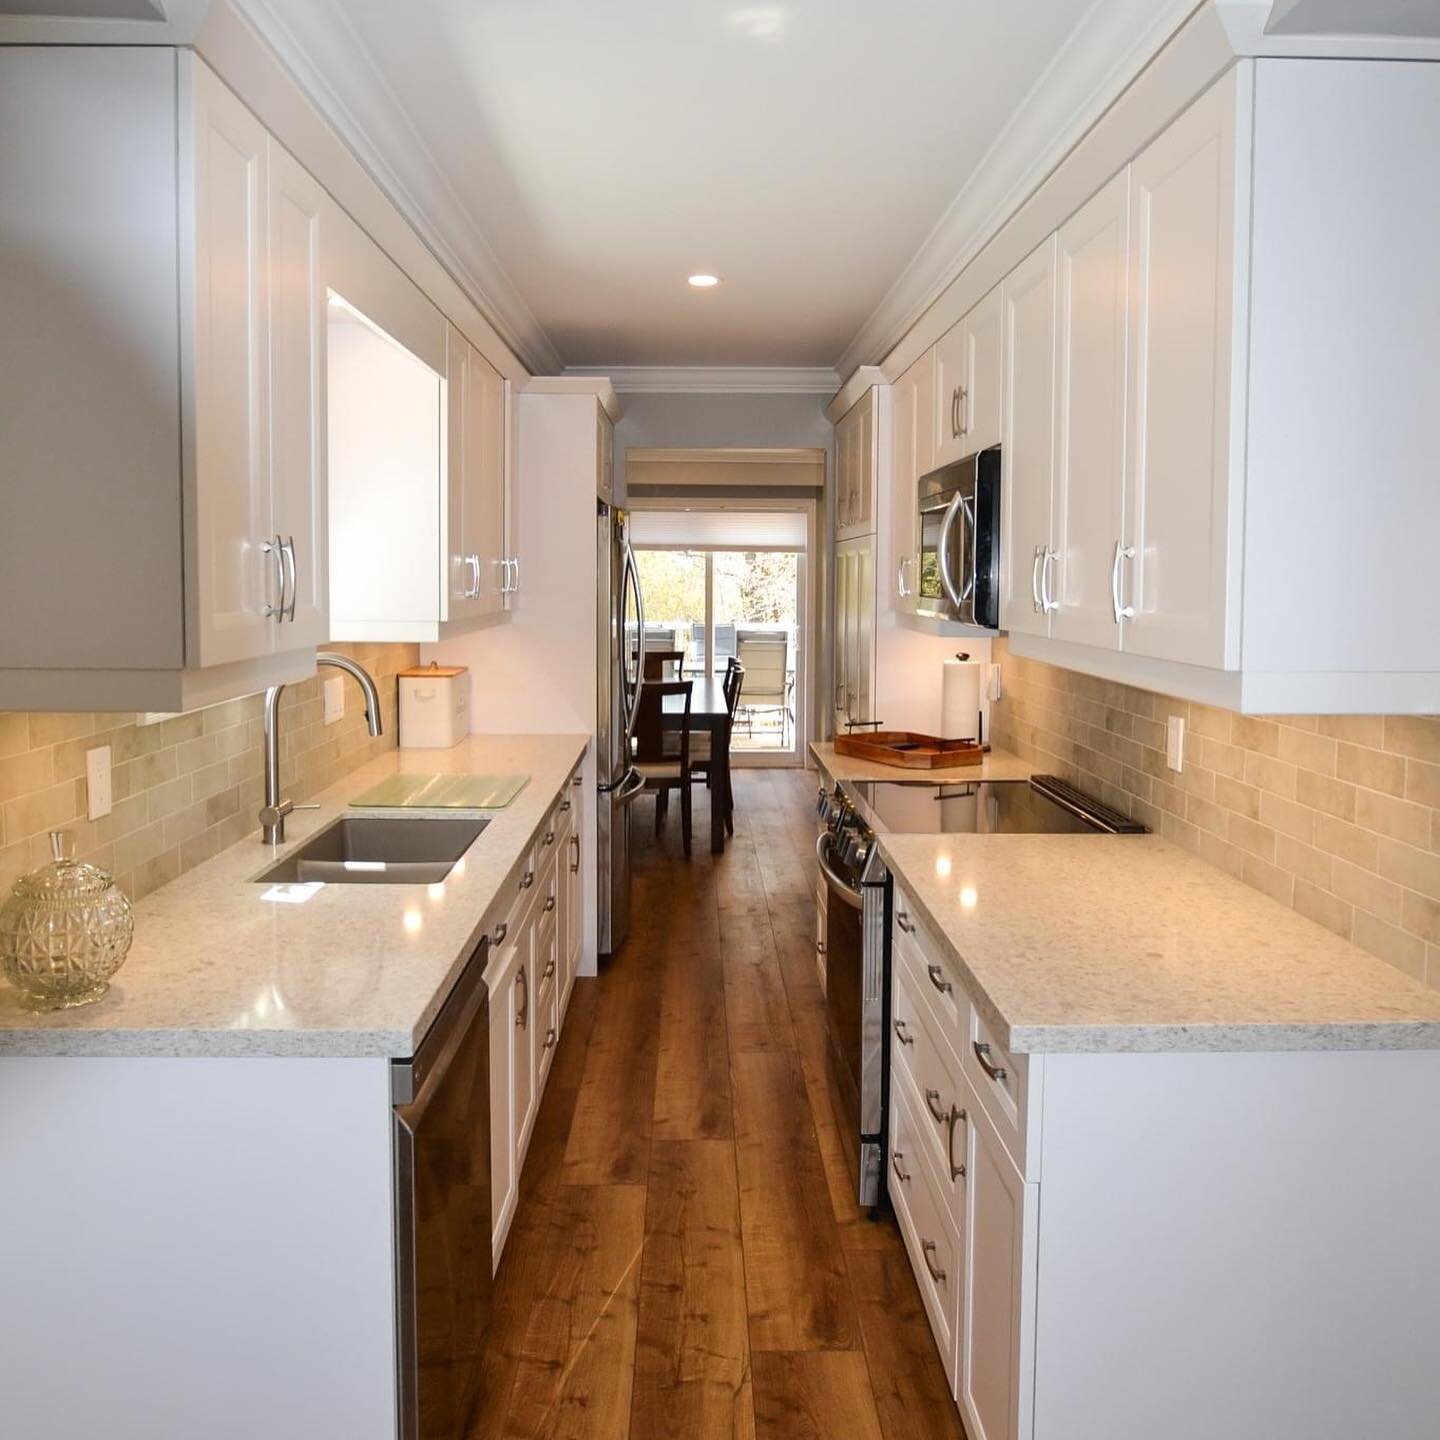 #BEFOREANDAFTER For this townhouse renovation we the PM Interiors Team took the galley kitchen and made it more functional with a better use of the space. A new staircase was created and a fireplace with a stone wall was made the focal point of this 